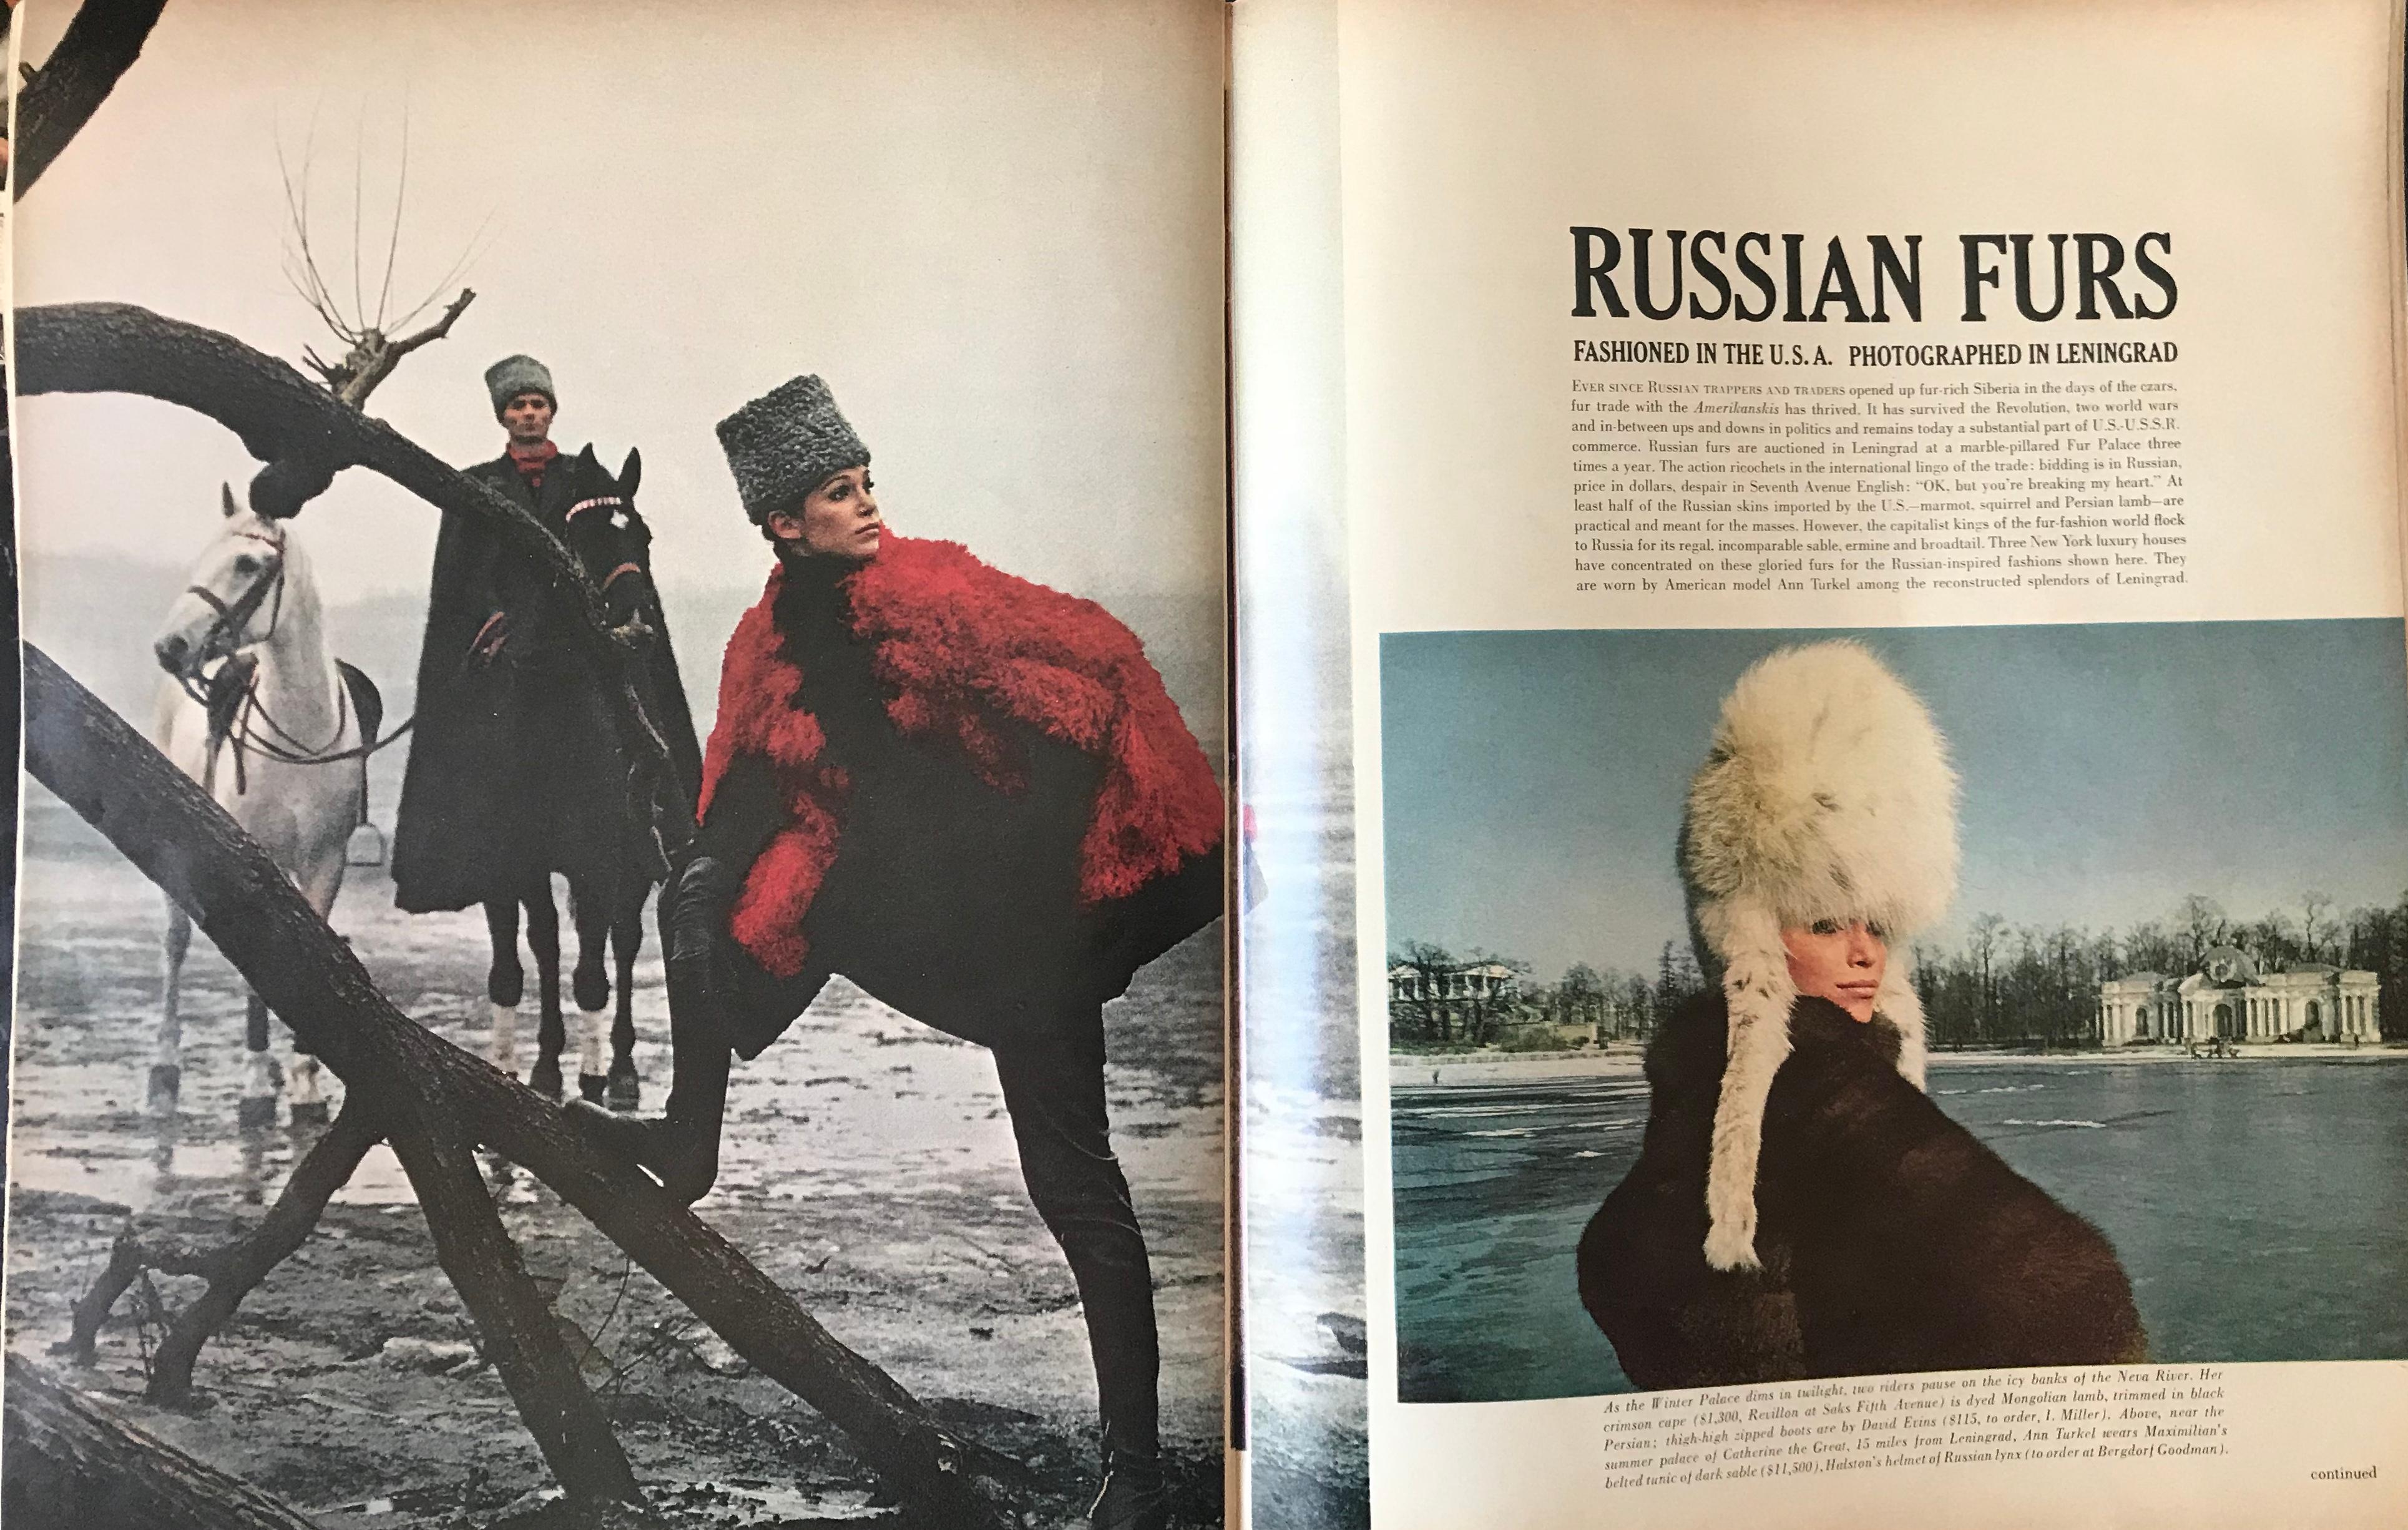 Fashion Photography / Editorial photoshoot for LOOK Magazine 1967 Russia Fashion Feature. Limited archival edition of 100. 

About Fred Maroon 
Born in New Brunswick, New Jersey, Fred J. Maroon was a photographer of international renown. His career